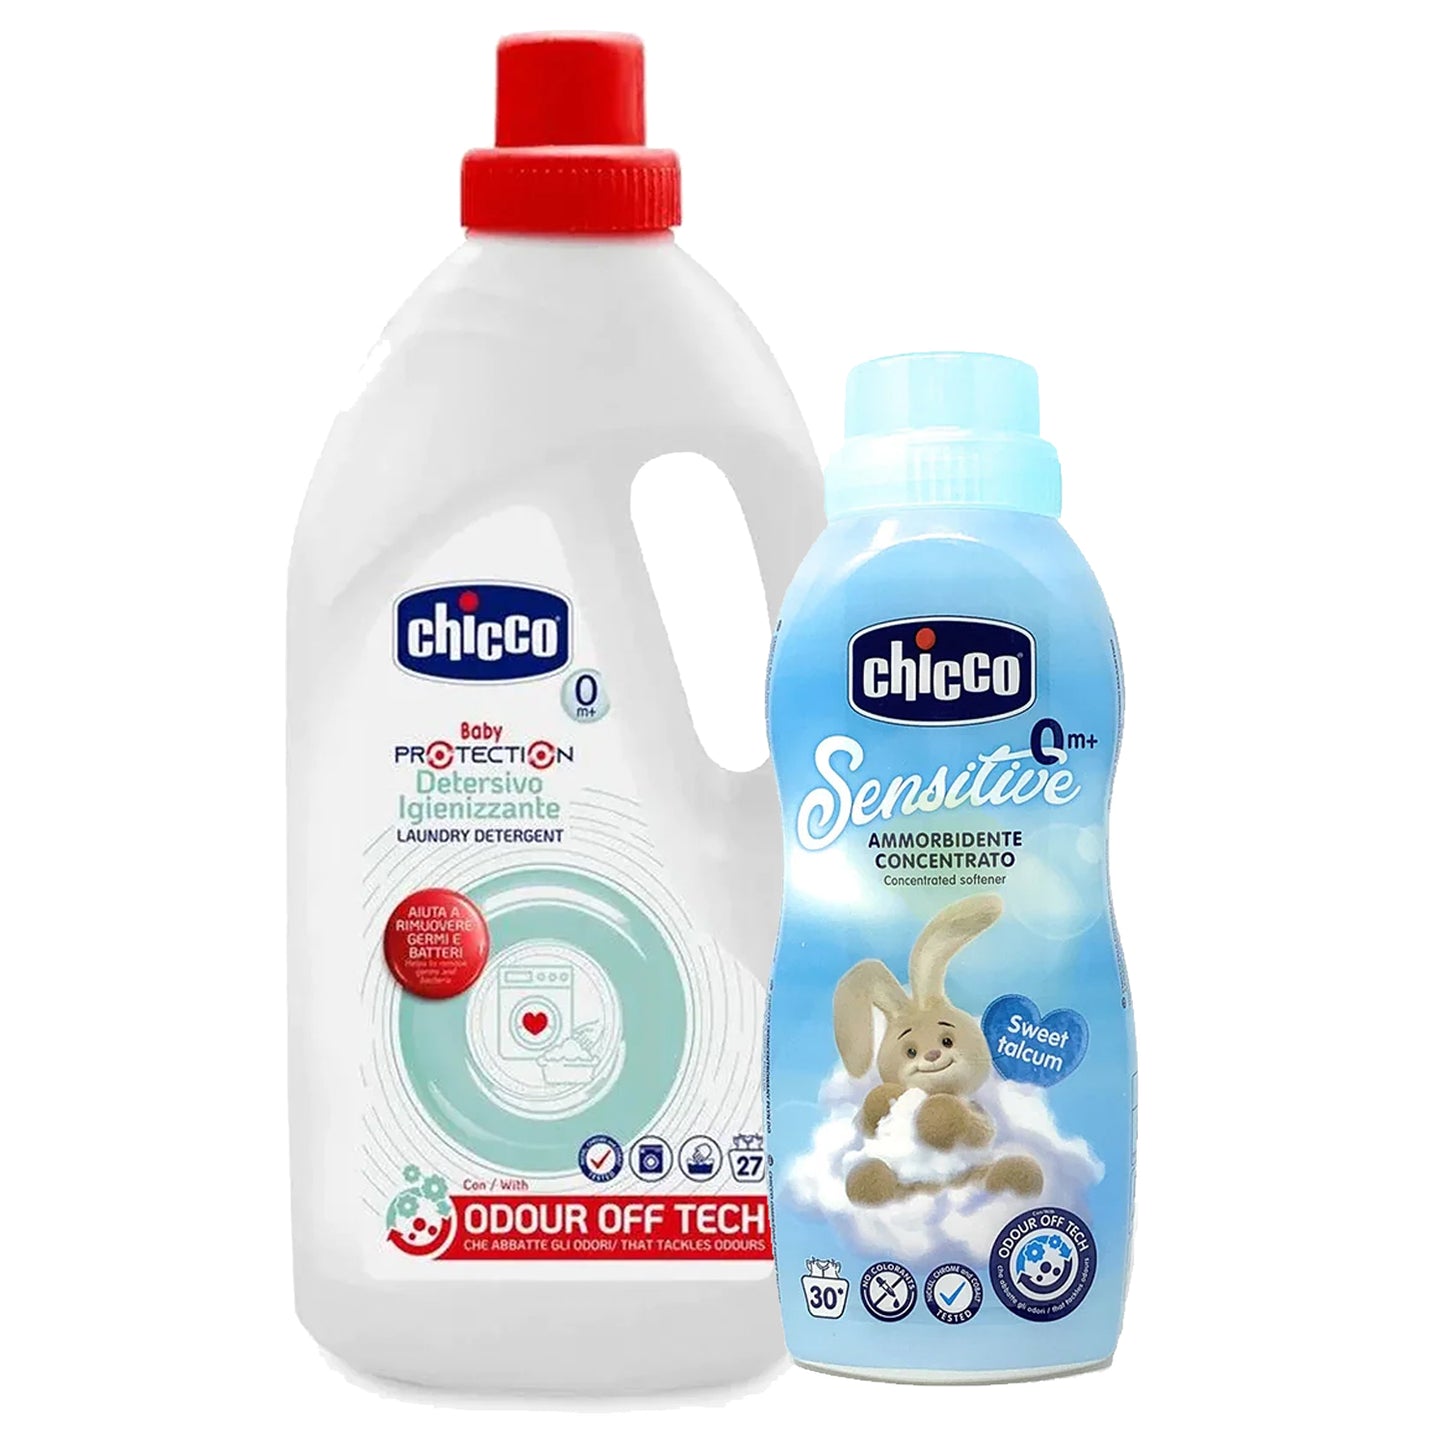 Chicco Baby Laundry Detergent & Softener Combo